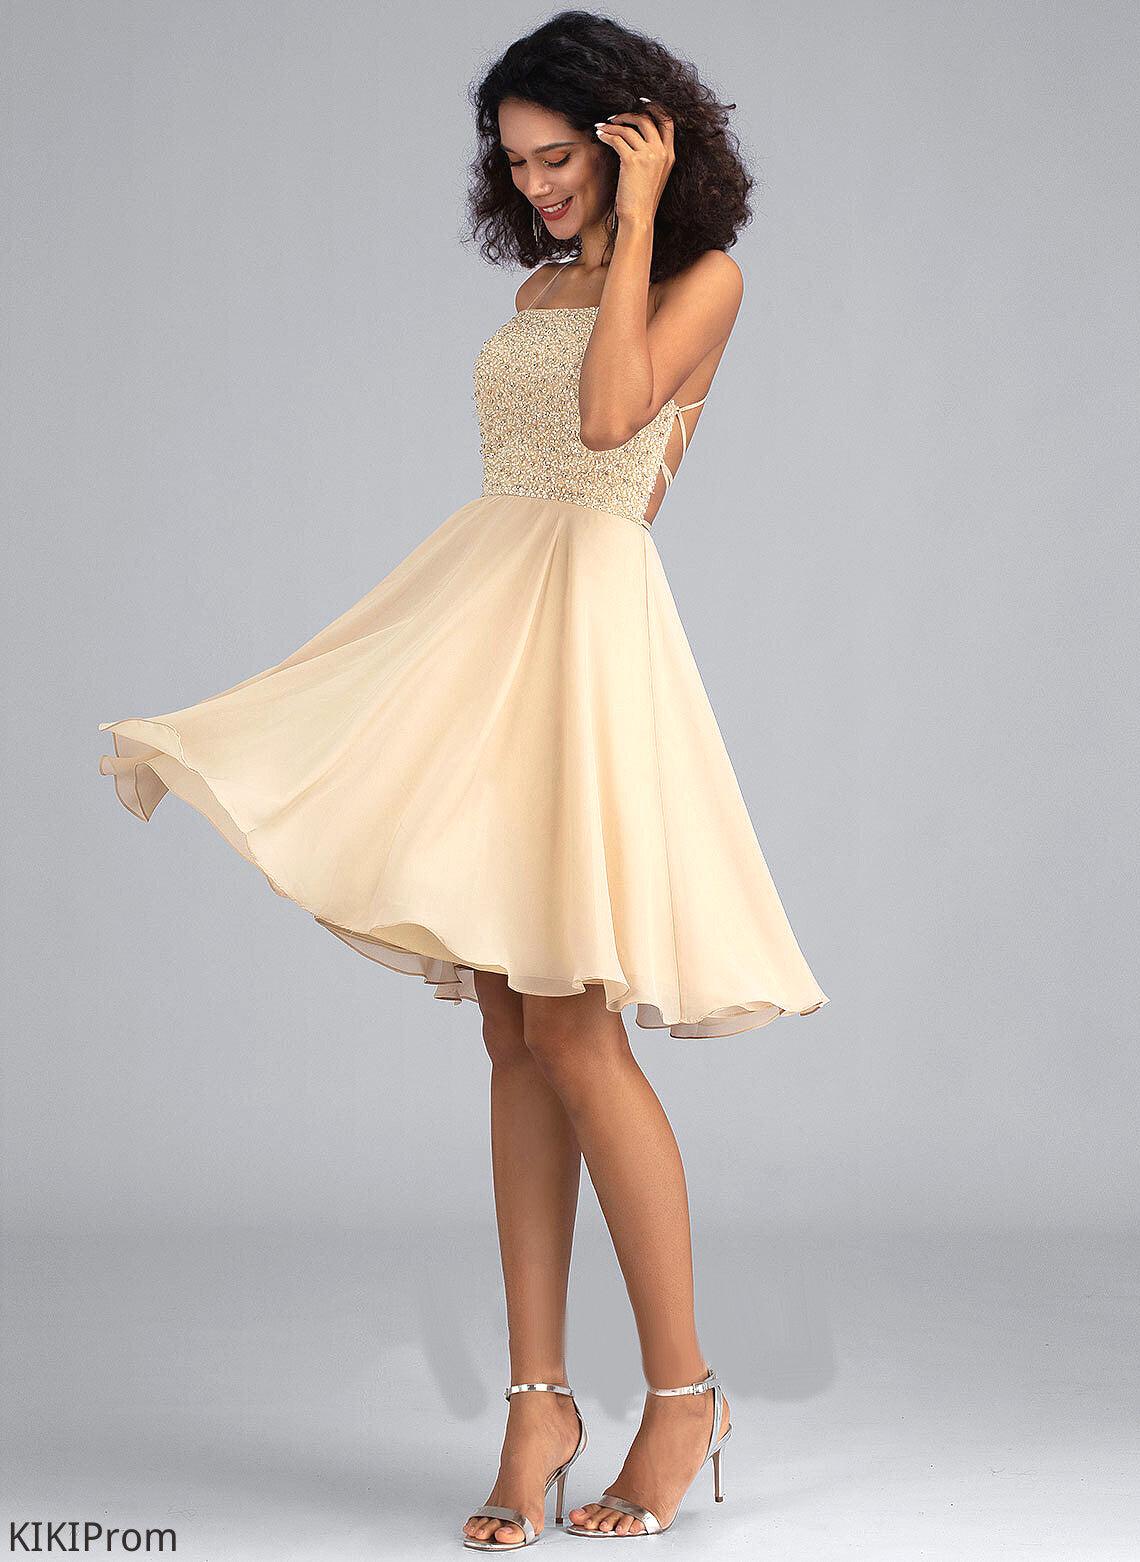 Neckline Chiffon Beading Square A-Line Dress With Pancy Homecoming Dresses Knee-Length Homecoming Sequins